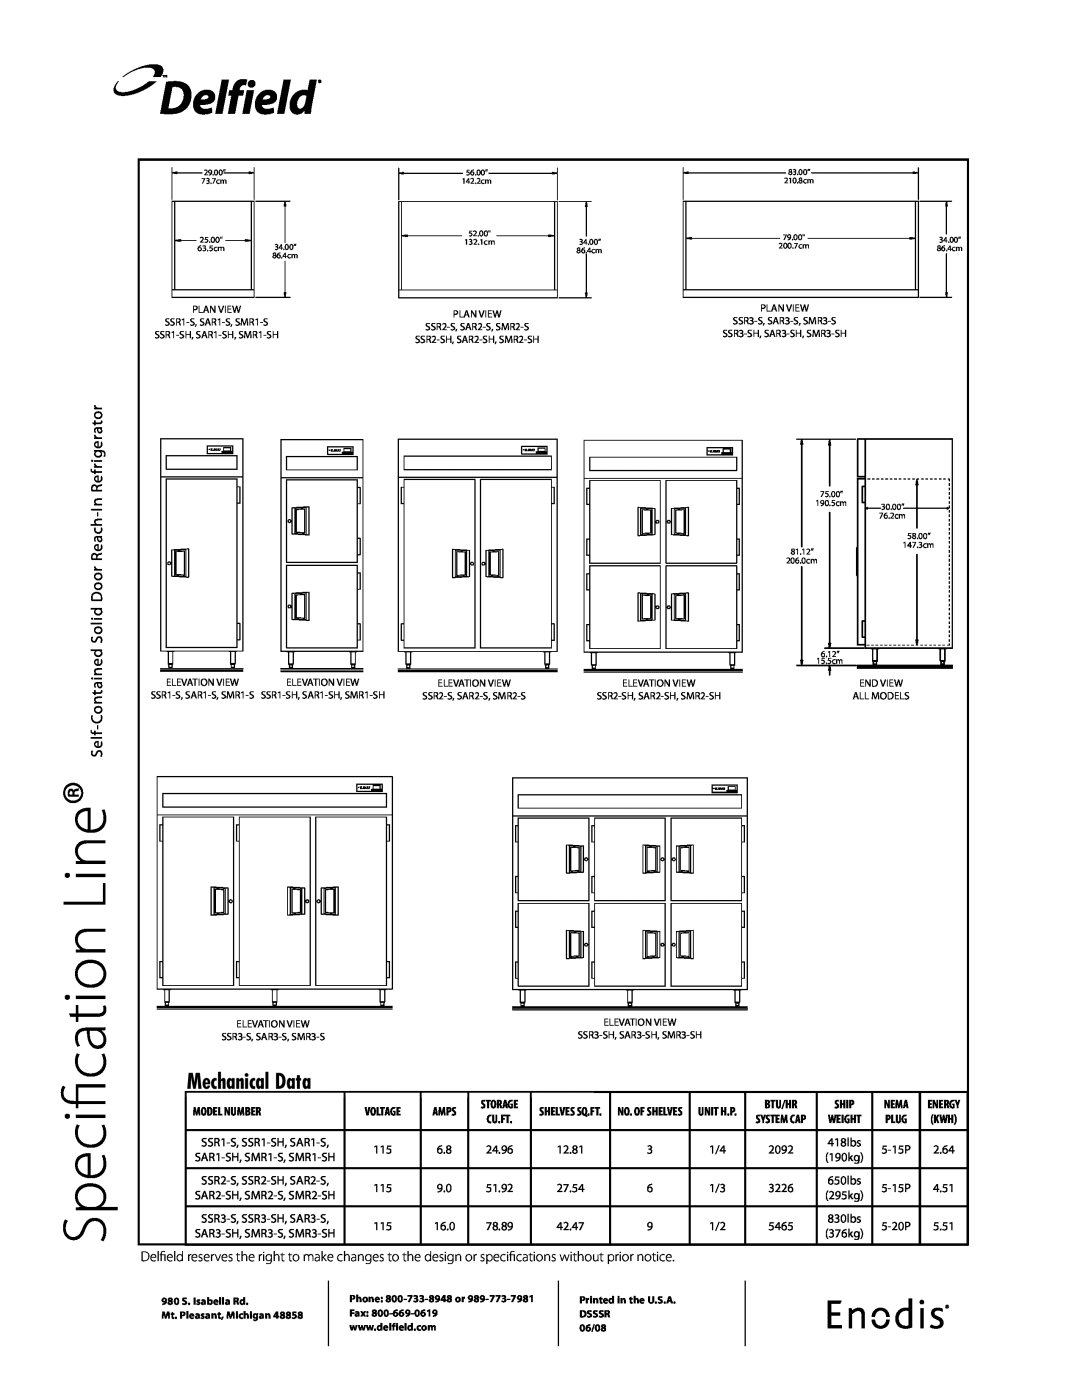 Delfield SSR2-SH Line, Specification, Delfield, Mechanical Data, Refrigerator, Solid Door, Self-Contained, Reach, Ship 